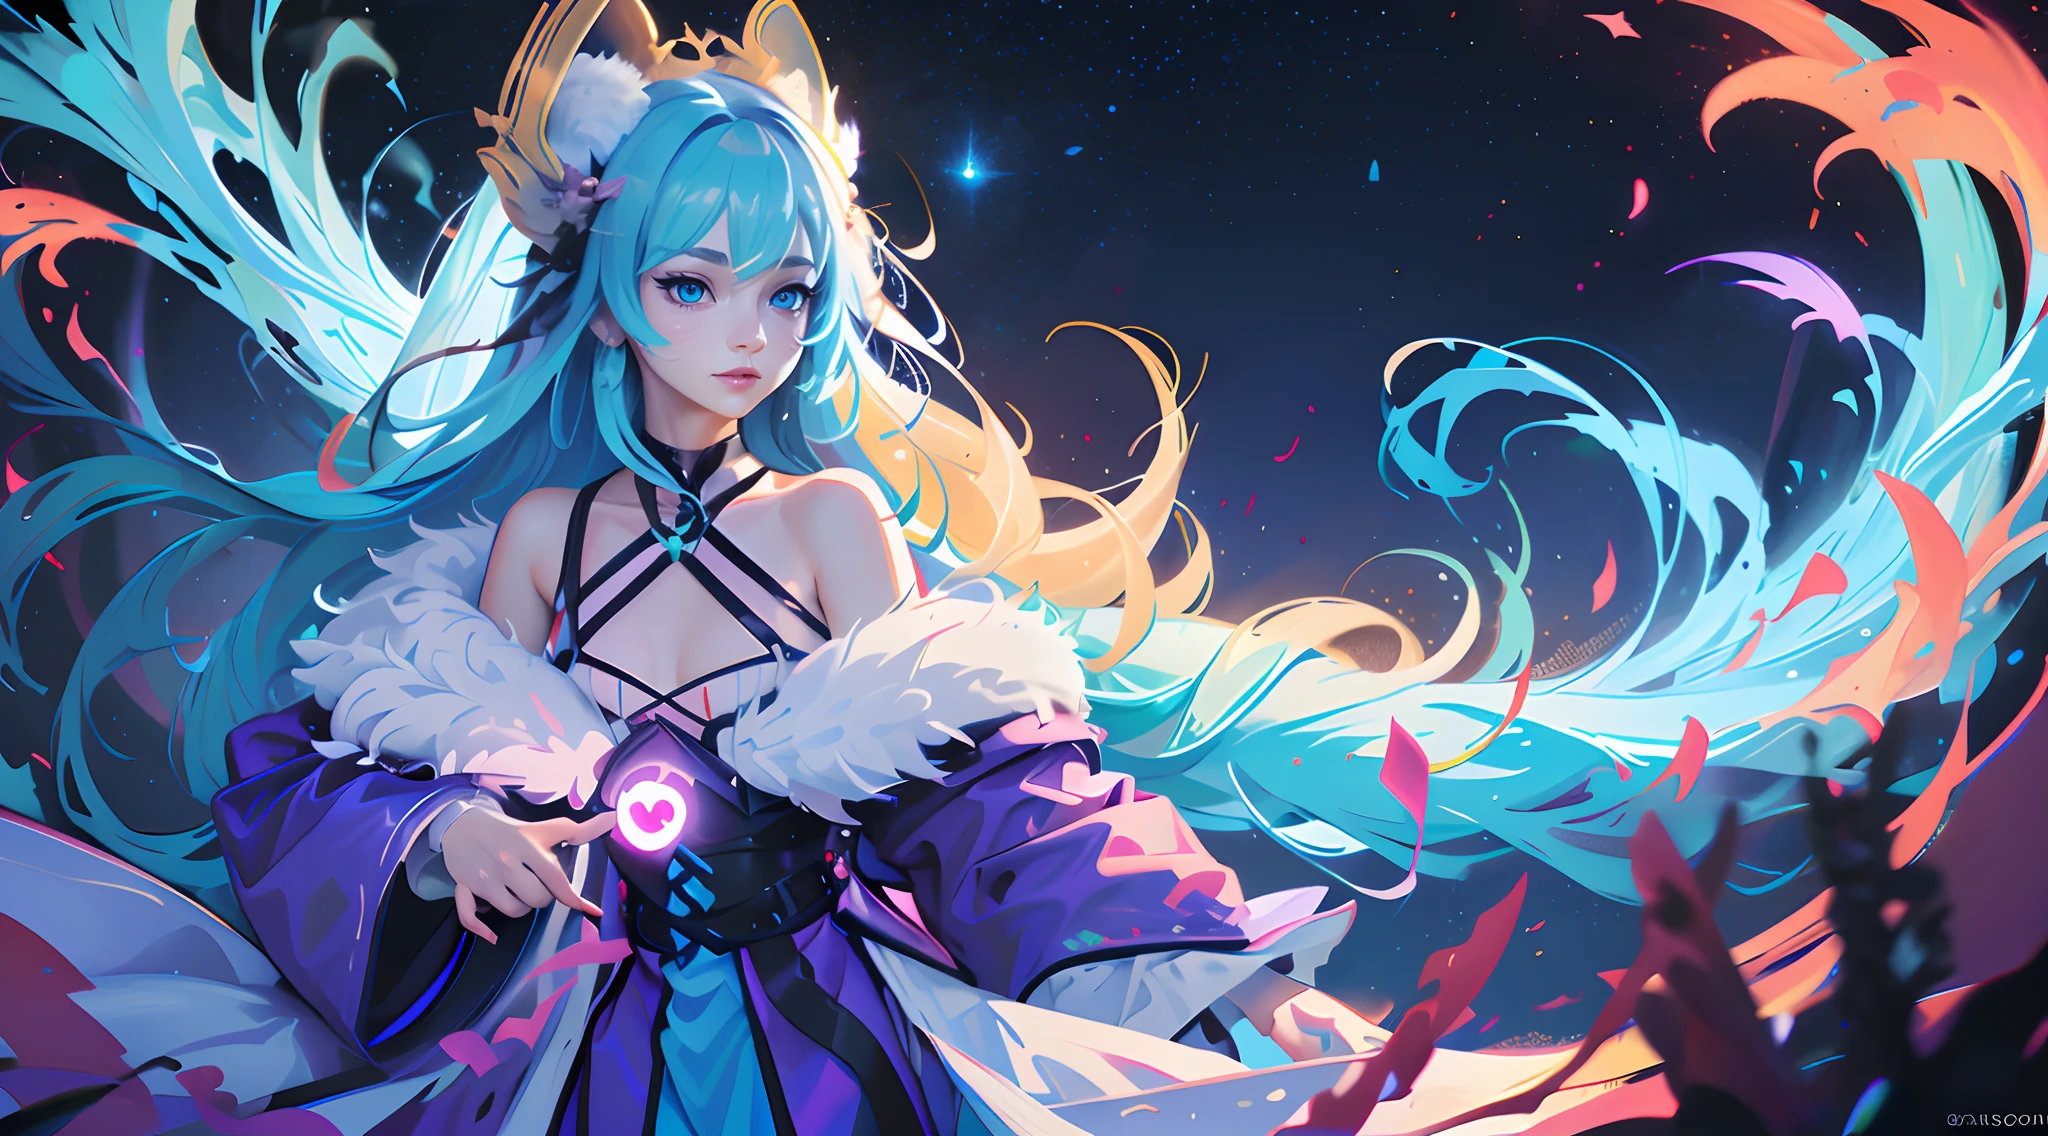 a picture of a beautiful nine tailed fox girl stares, glowing eyes, small blue aura flame around her, masterpiece, best quality, light particle, depth of field, field, scenery, fantasy, starry night, red light, blue light, far away, pastel colors, chromatic aberration abuse, dark, cloudy sky, space, blue aura, aura, cinematic, dark atmosphere, day, dark hole,  purple light, illumination, ultra realistic details, arcane art style, inspired by NEVERCREW, hypervivid intense mcbess, inspired by Tim Biskup, digital illustration, by Justin Gerard,